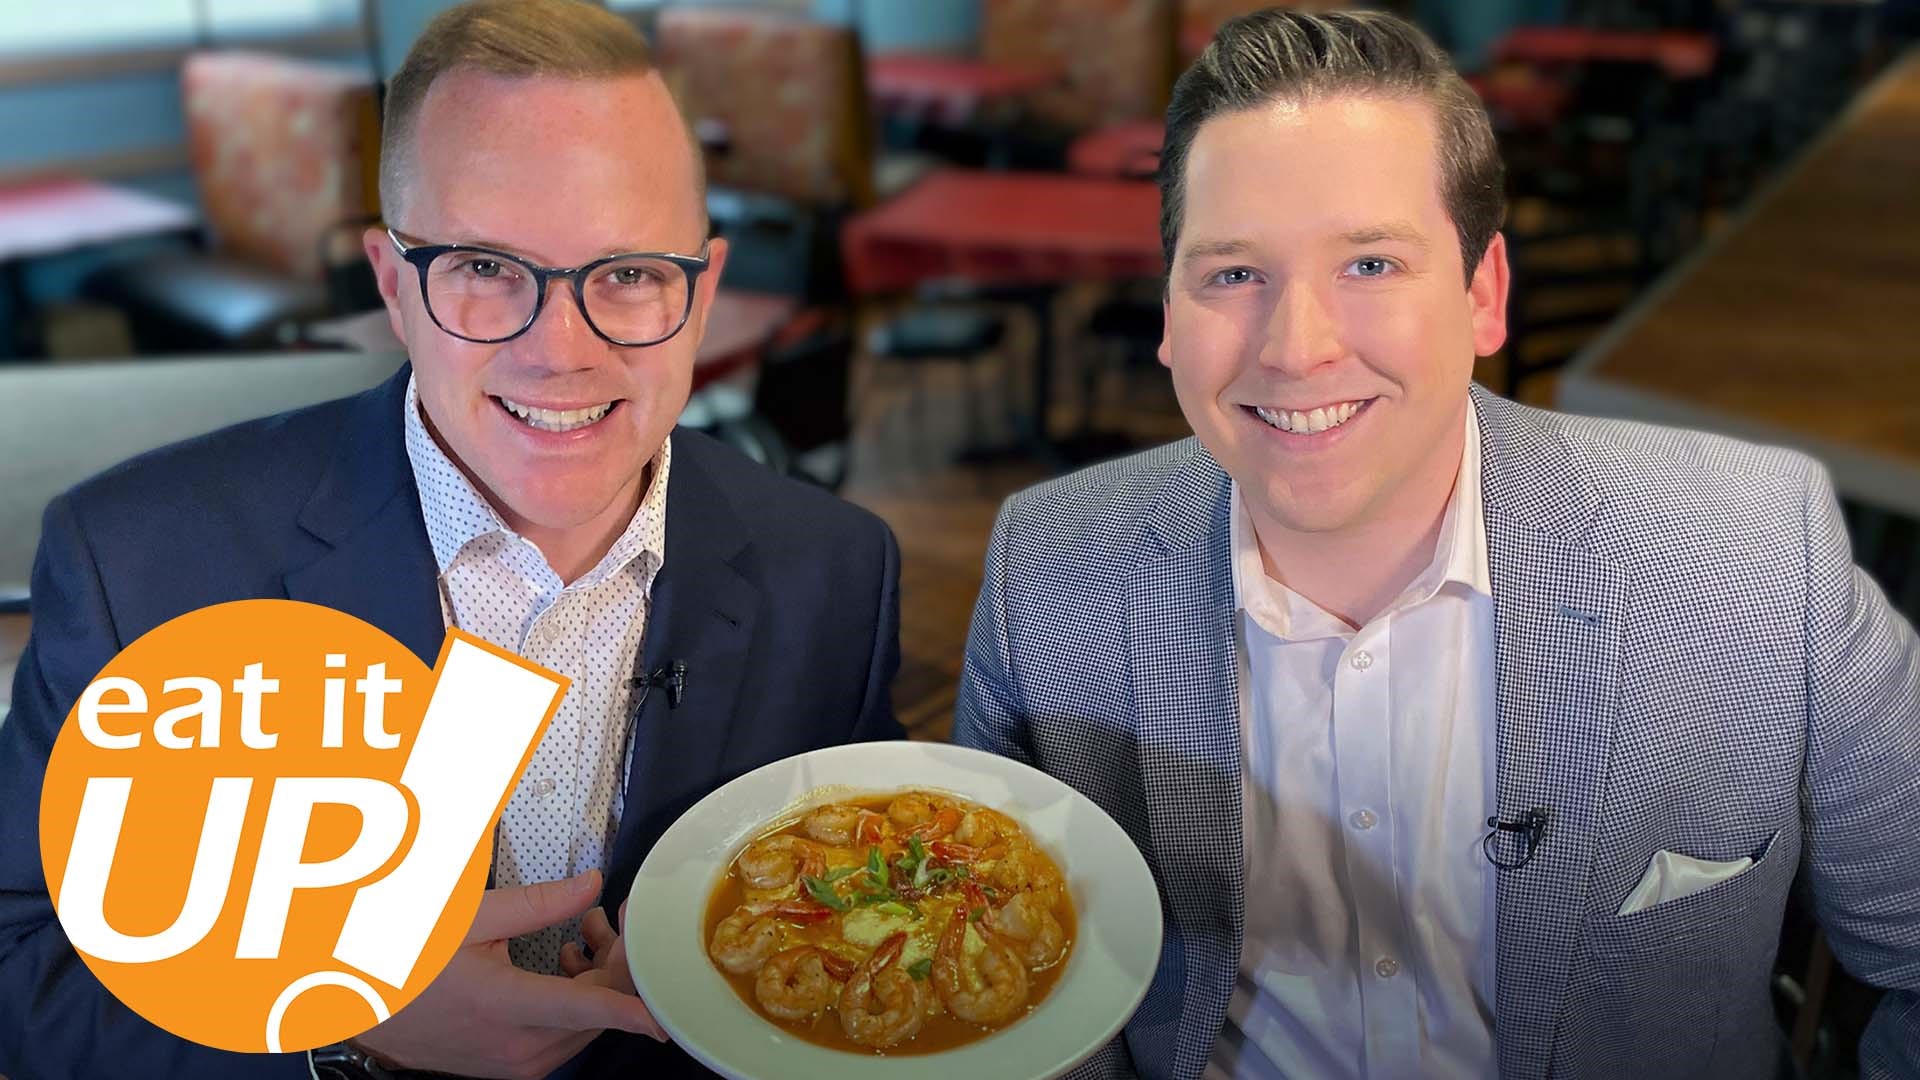 This week, Skot and Hayden take us to Maddie's Place, an Arkansas restaurant known for its New Orleans-styled dishes.